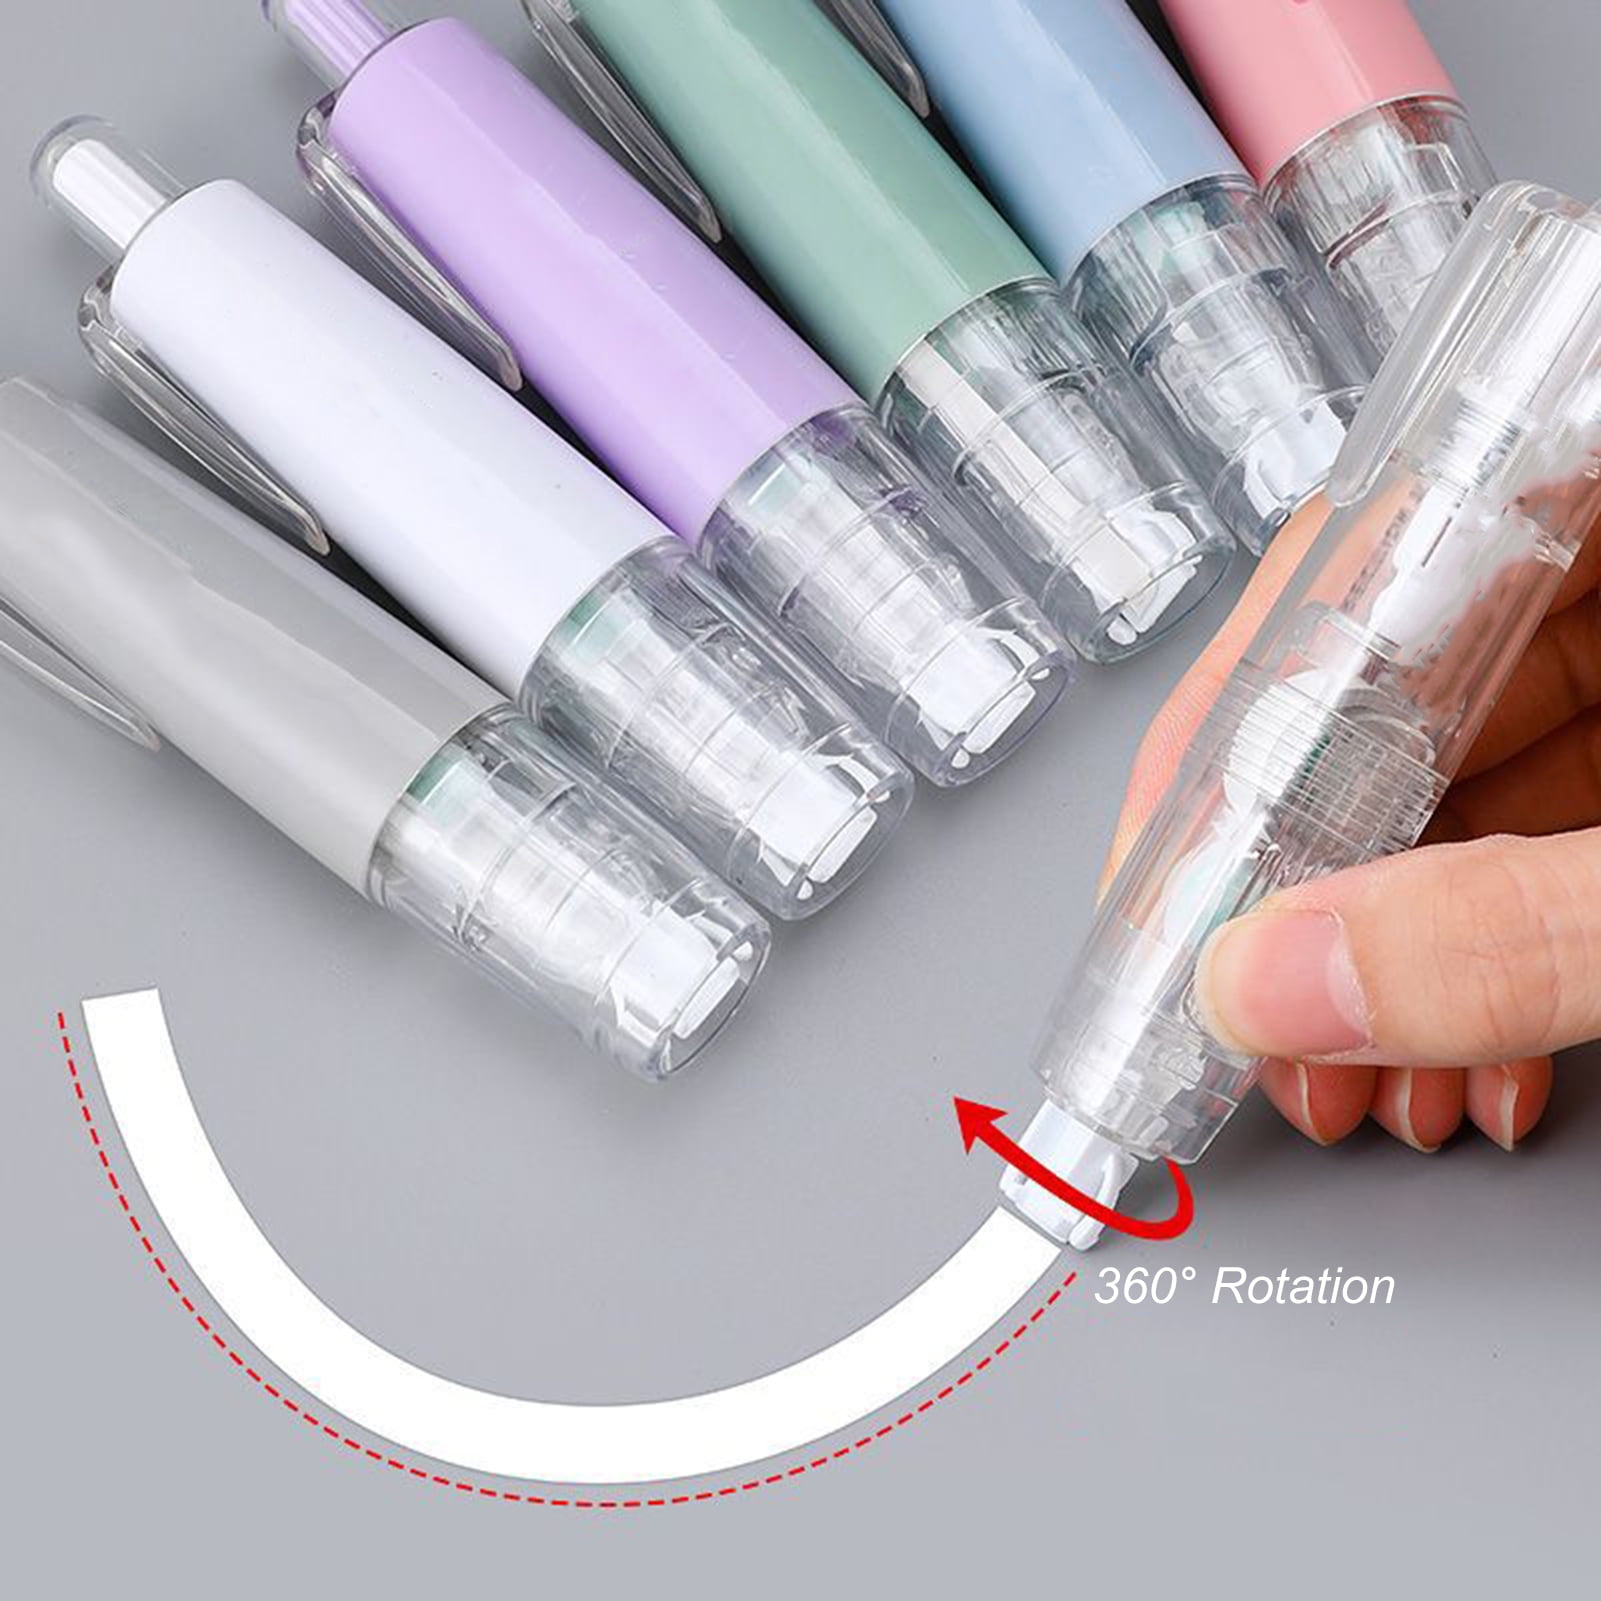 I0DO ReFillable Touch Up Paint Pen for Walls/Home,Small Touchup Paint  Brushes Syringe Pen Applicator Touch-Up Paint Brush Pen for Wood